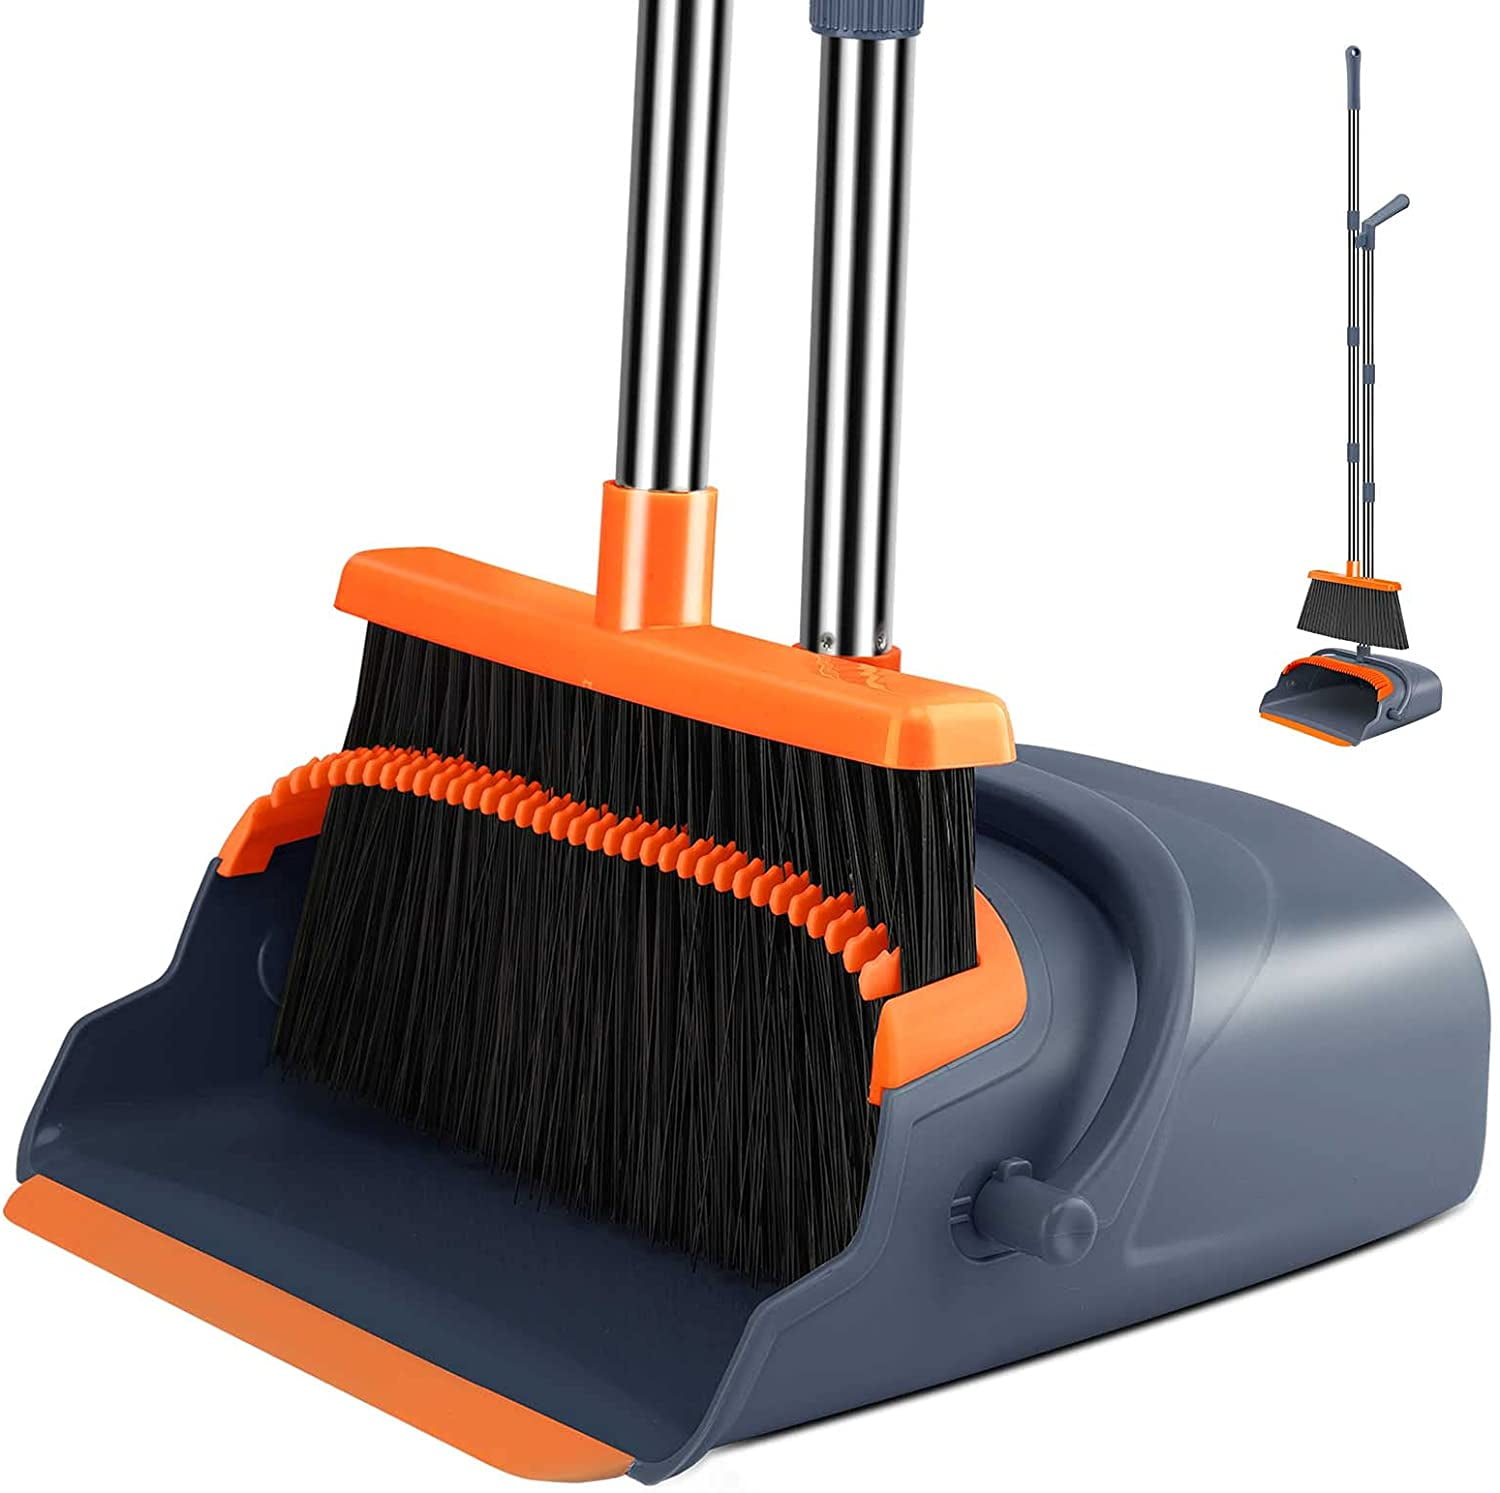 New Dustpan and Brush Long Handle Broom for Cleaning Sweeping Black White UK 